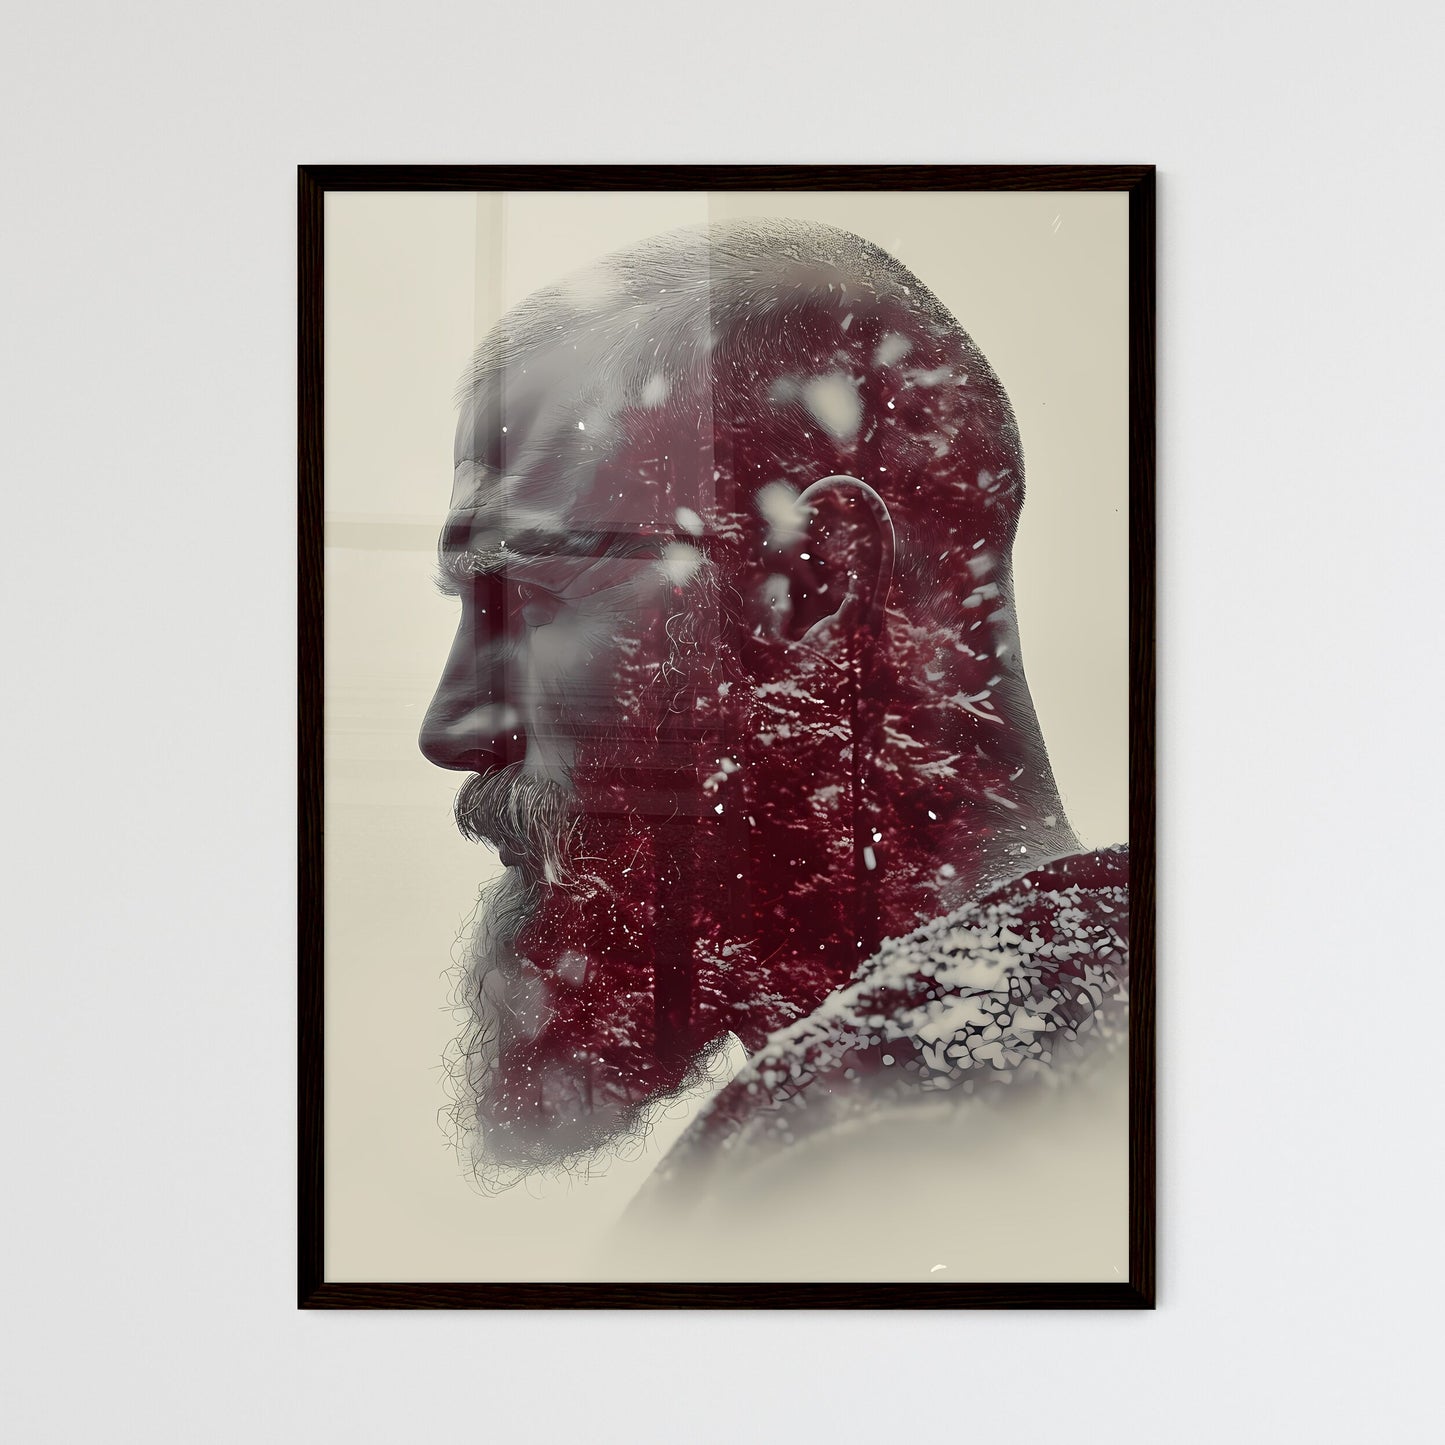 Half man half creature - Art print of a man with a beard and a snowy landscape Default Title